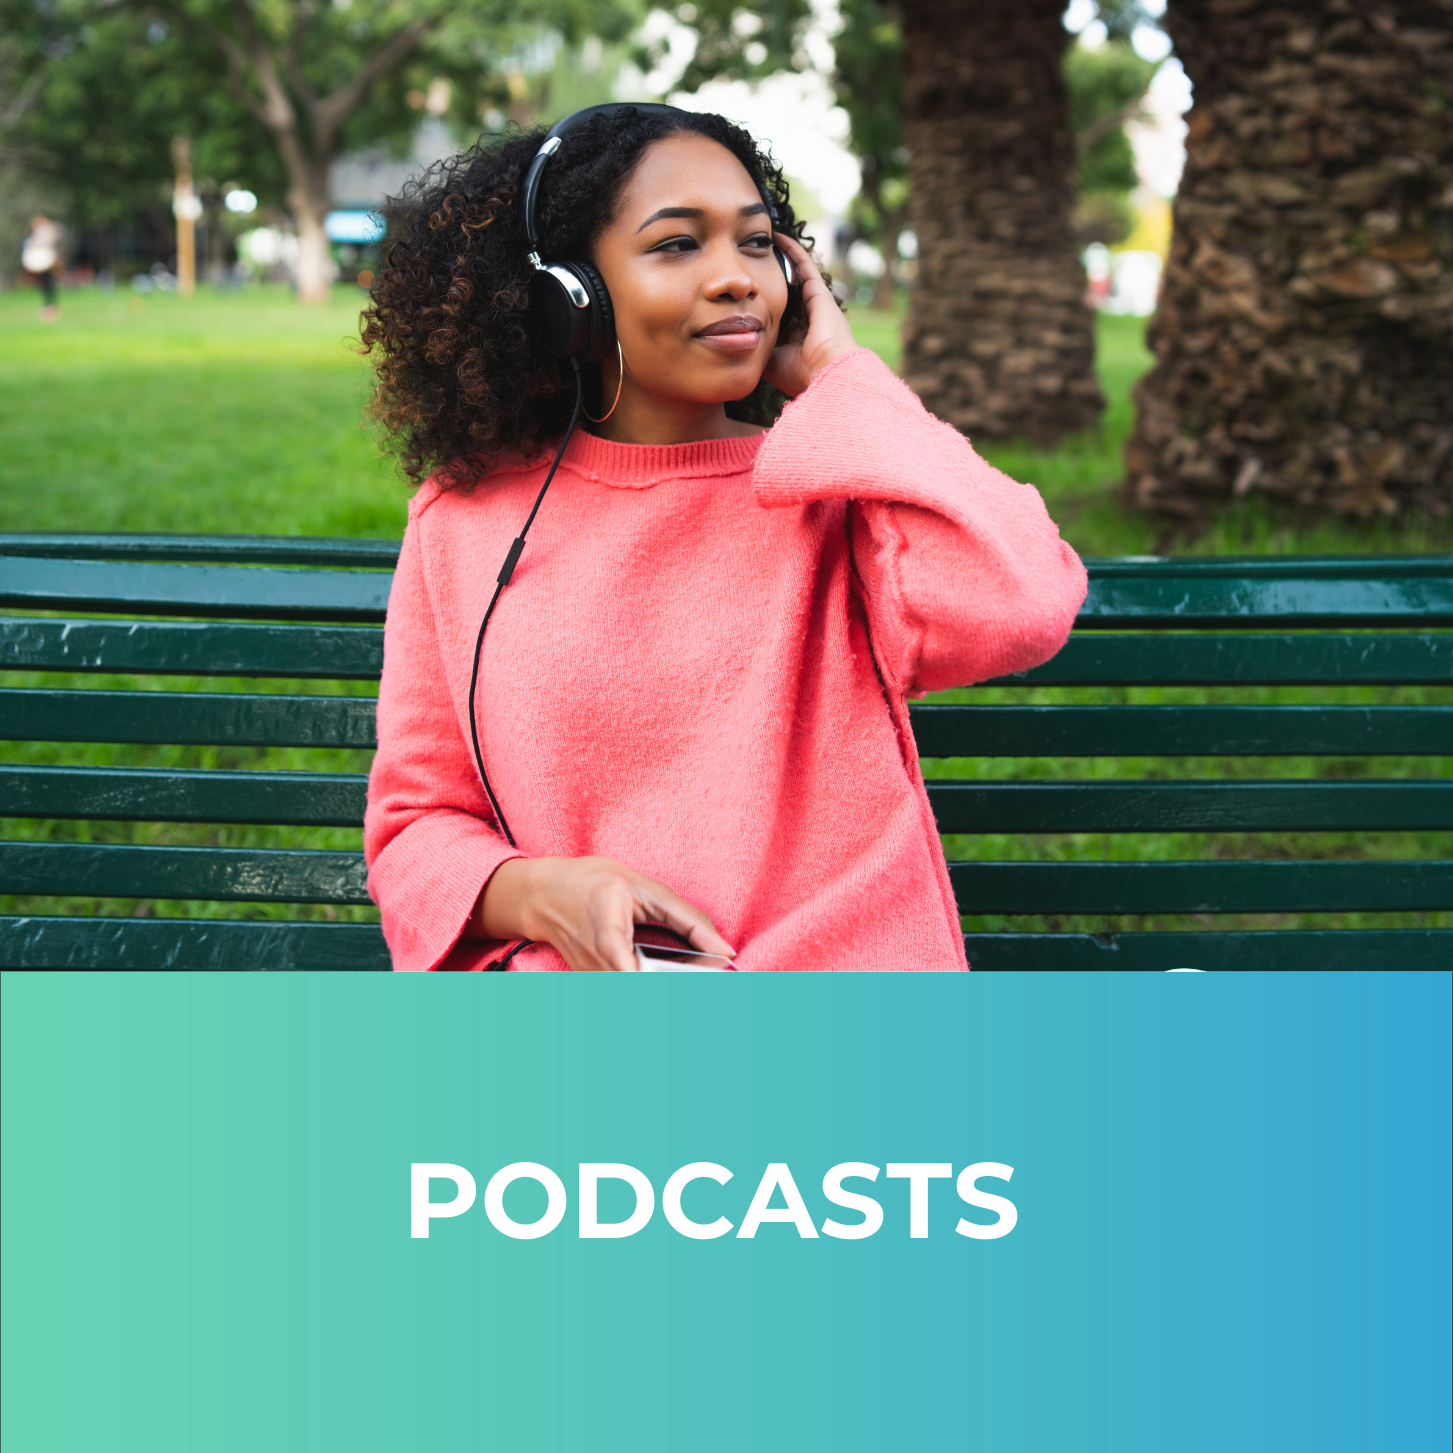  How can I fight climate change? How can I lower my carbon footprint? What are the consequences of climate change? Discover a range of podcasts that discuss all this and more! We have hand-selected podcasts which provide both educational and entertai